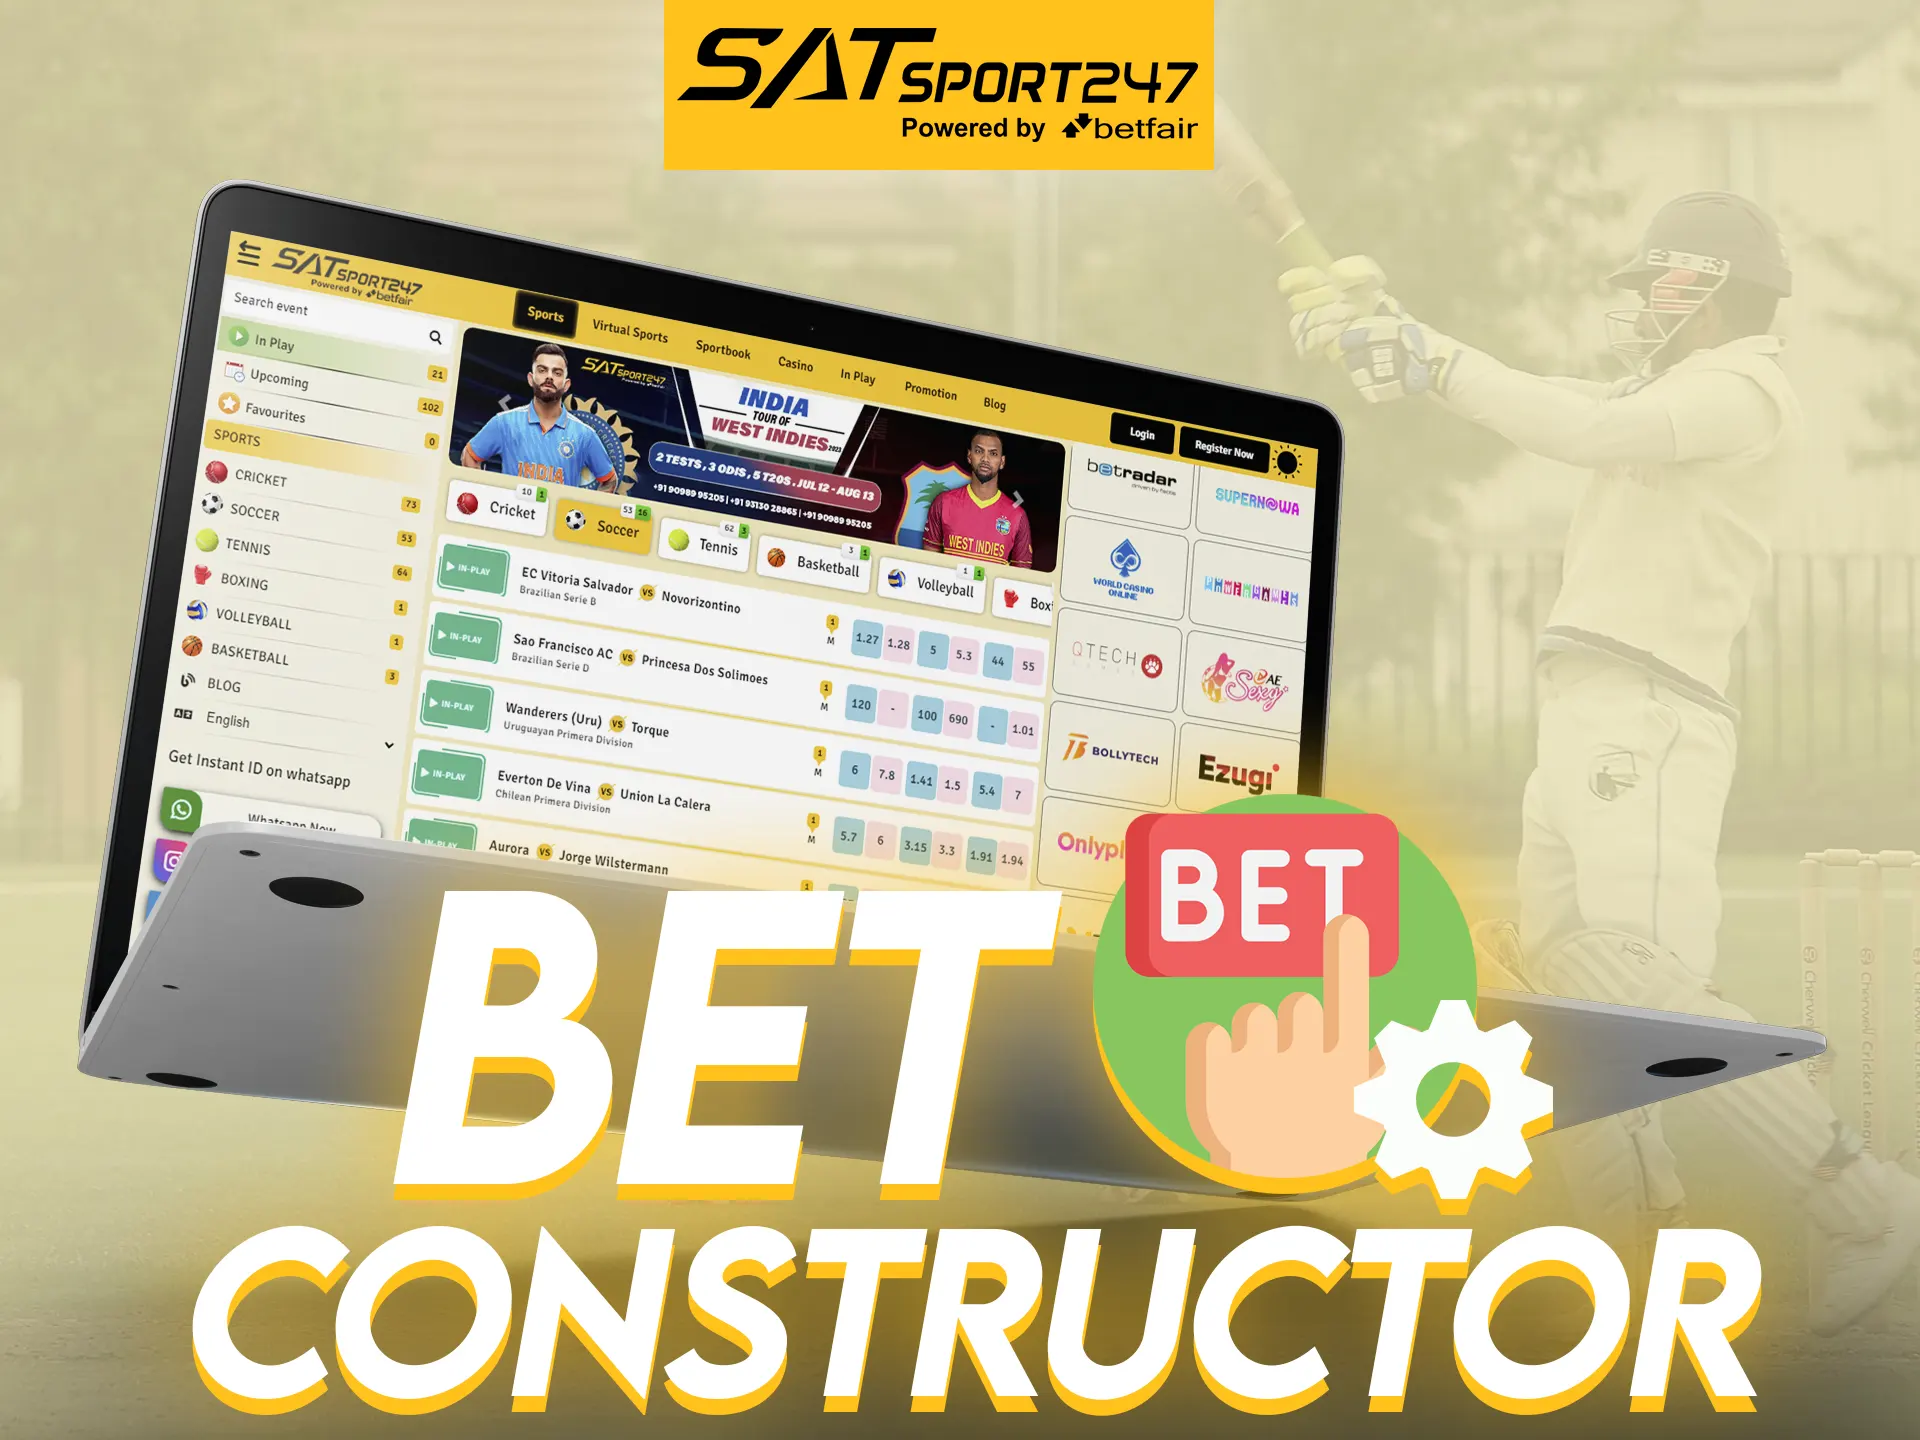 On Satsport247, try the bet constructor.